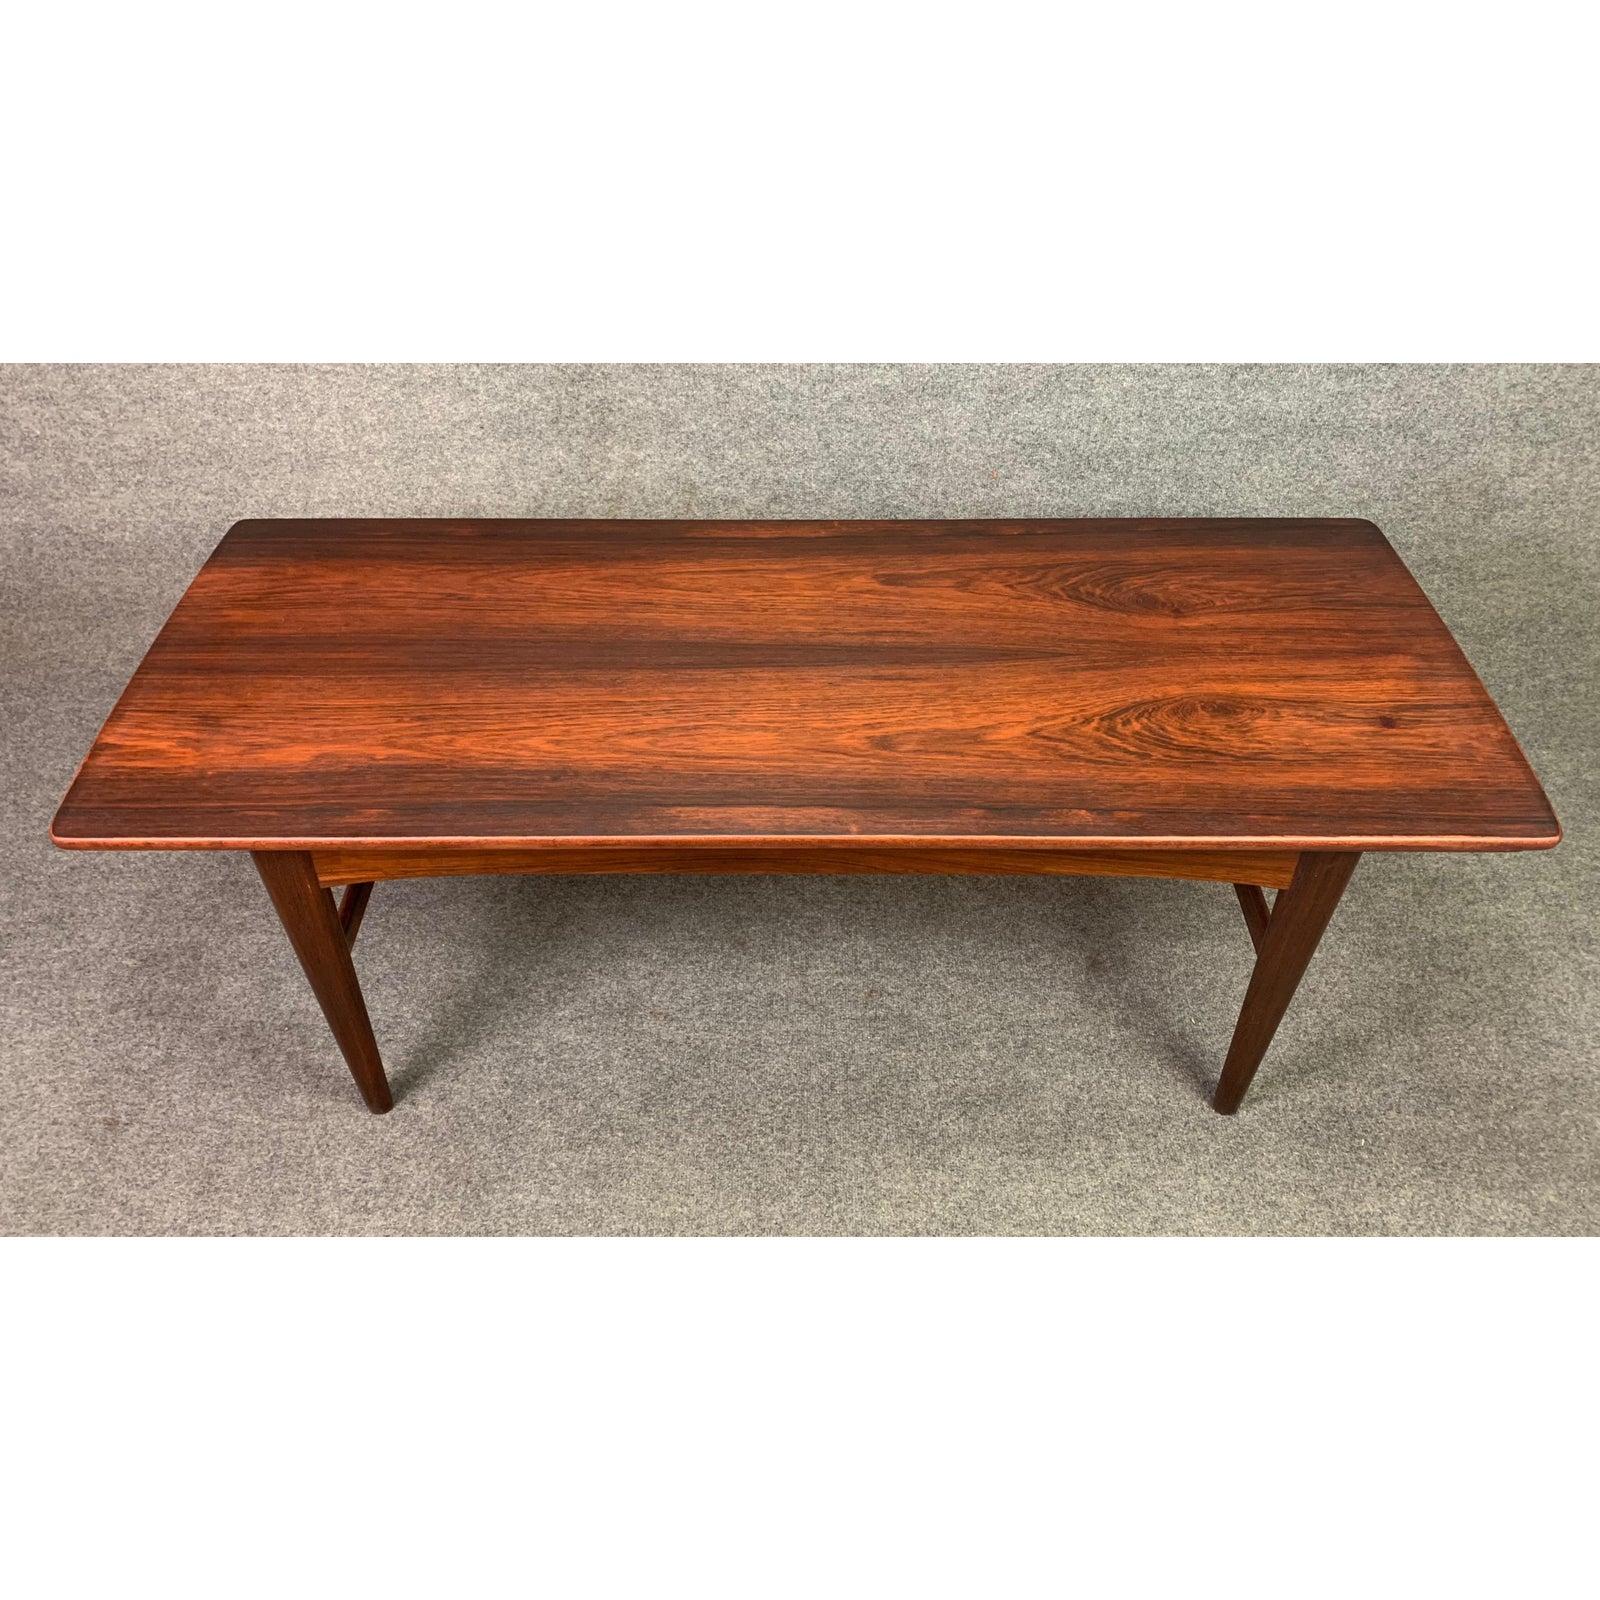 RESERVED FOR NOA: Vintage Danish Mid-Century Modern Rosewood Elevator Table 1